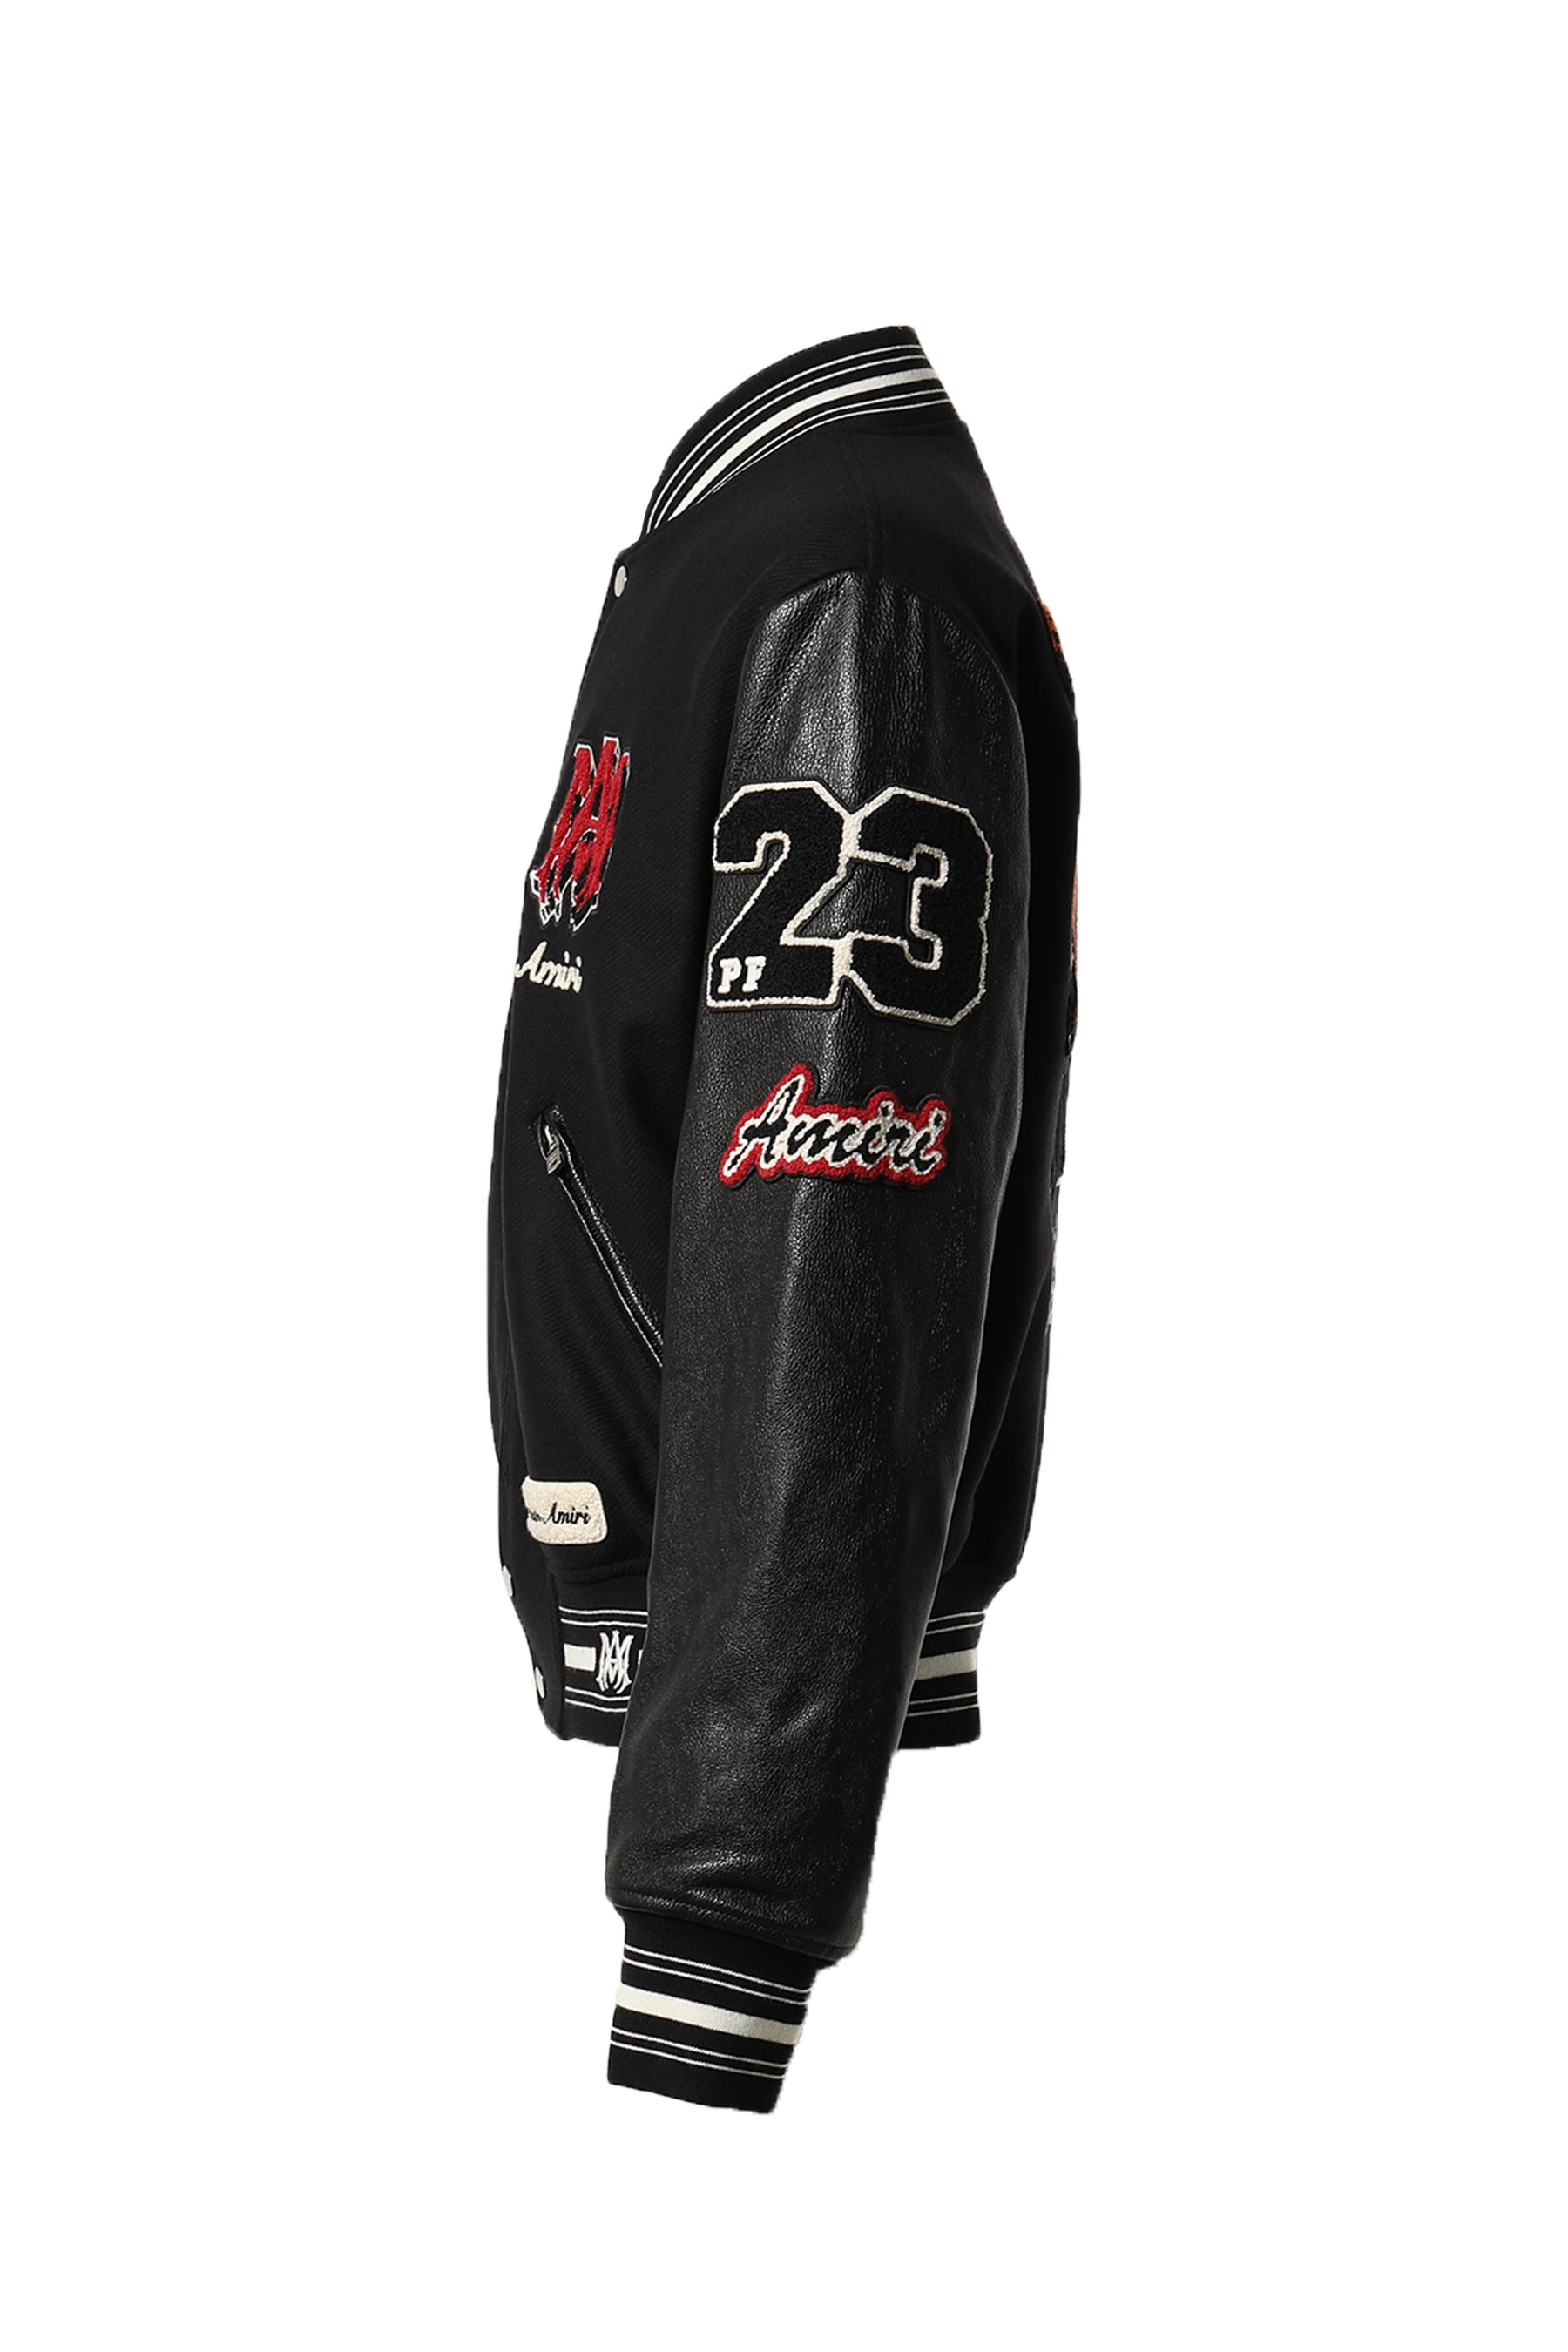 Palm Angels Patch-Detail Embroidered Varsity Jacket Black Men's - SS21 - US